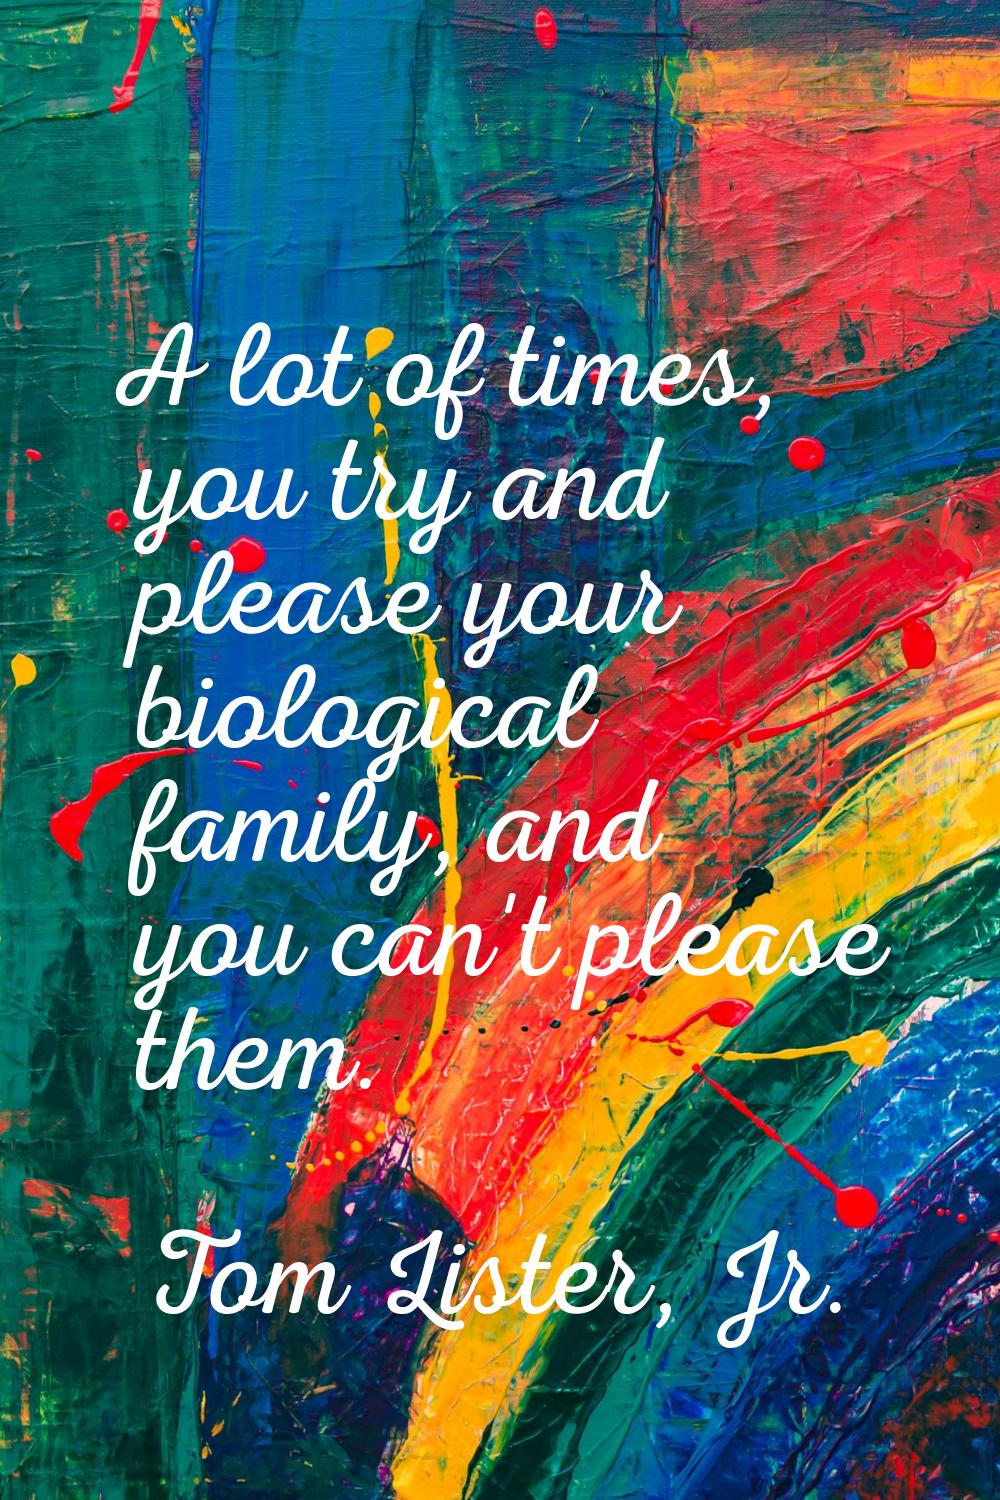 A lot of times, you try and please your biological family, and you can't please them.